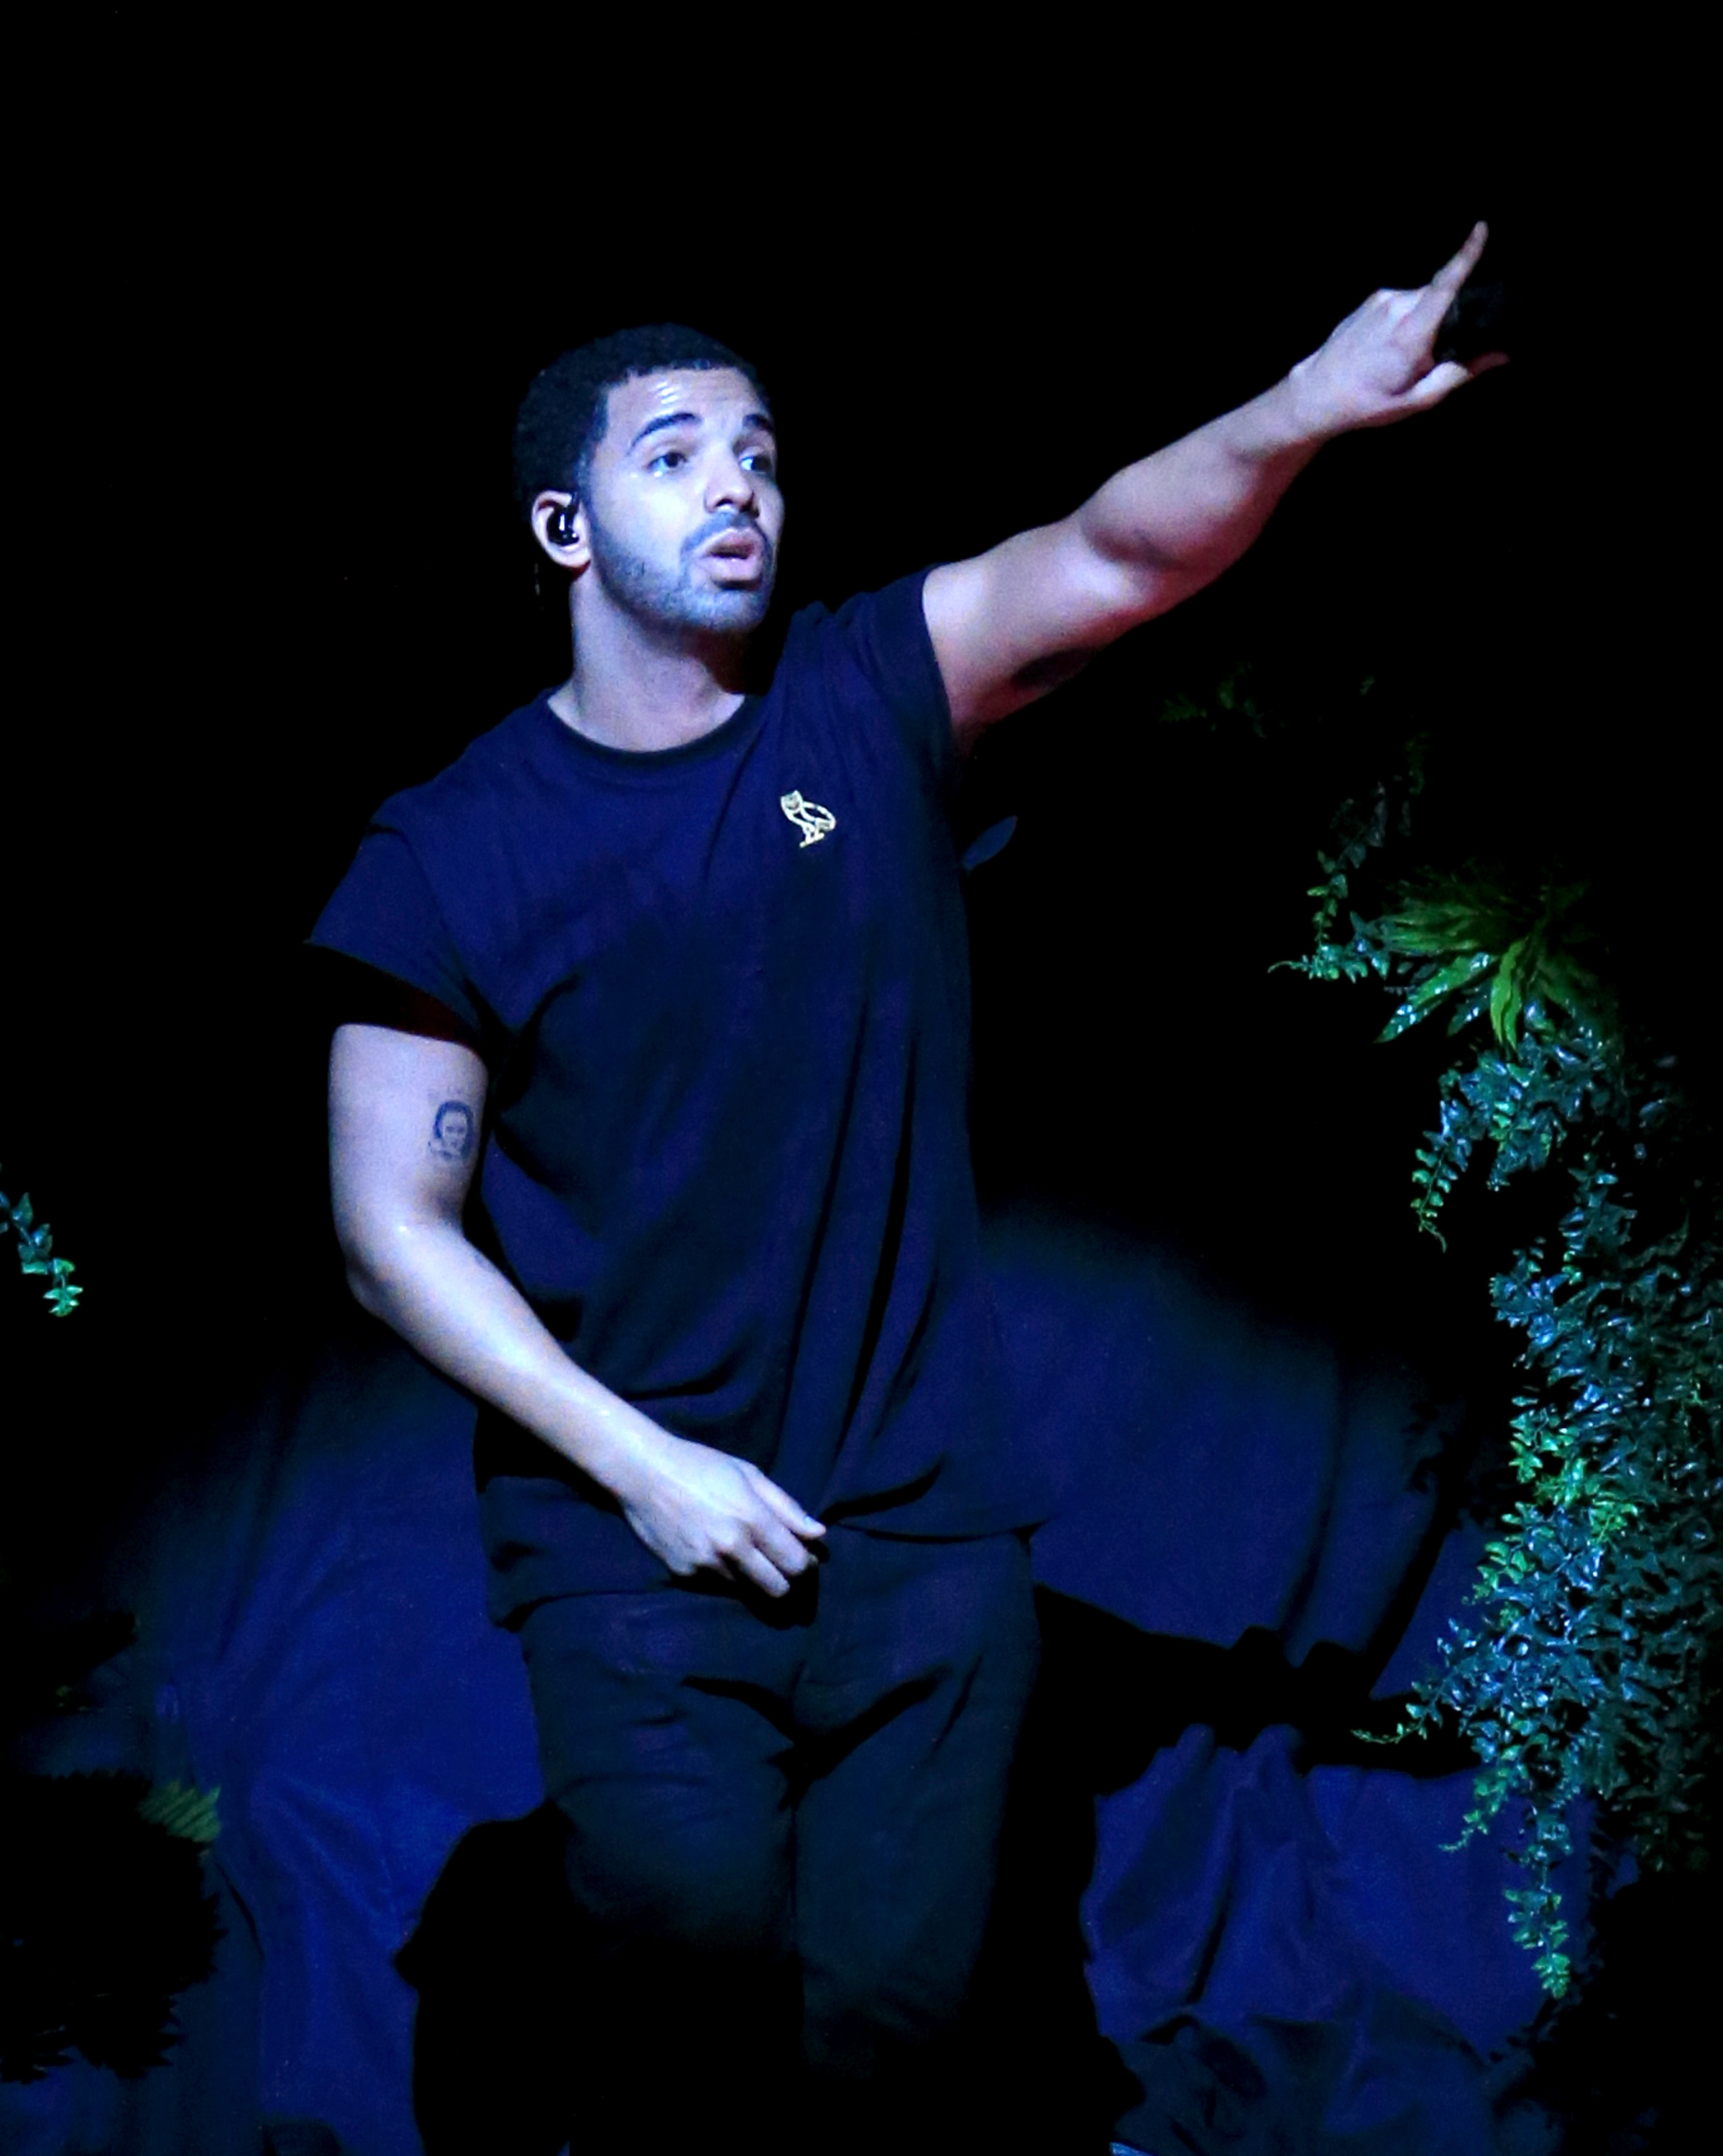 Drake Leads Bet Award Nominations With 9 